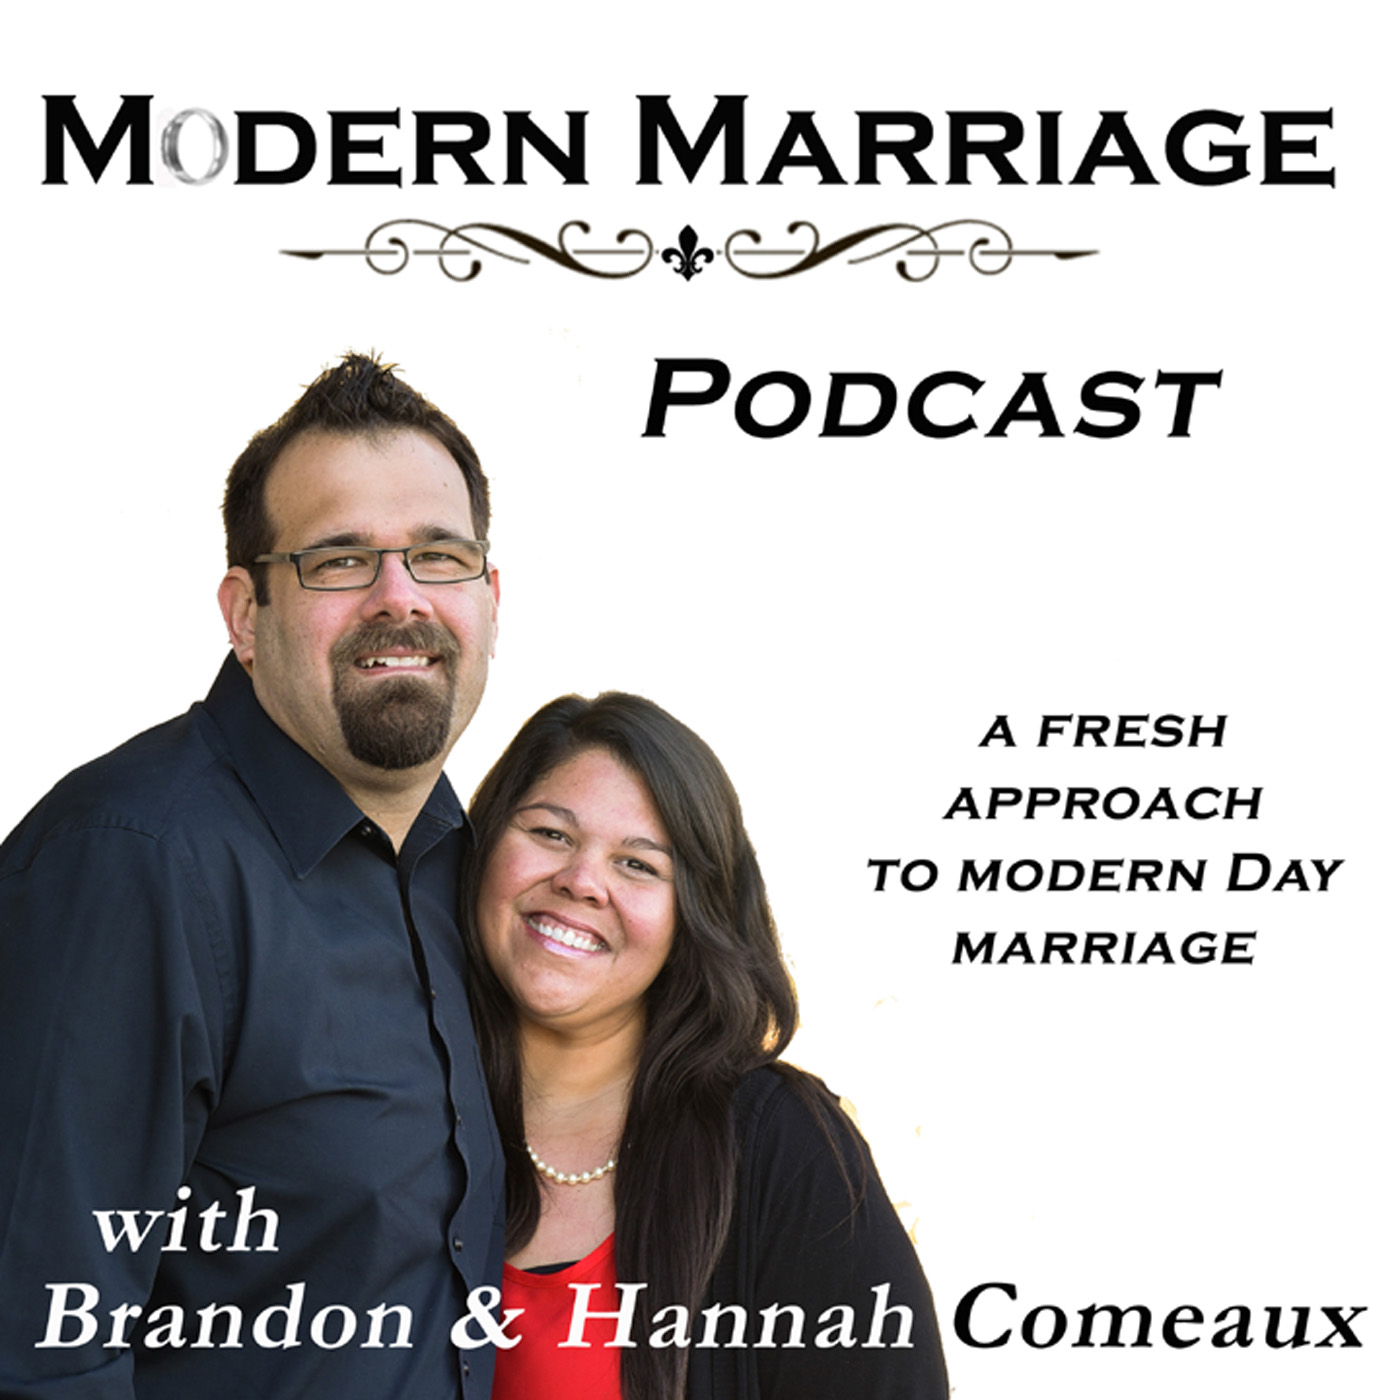 The Modern Marriage Podcast